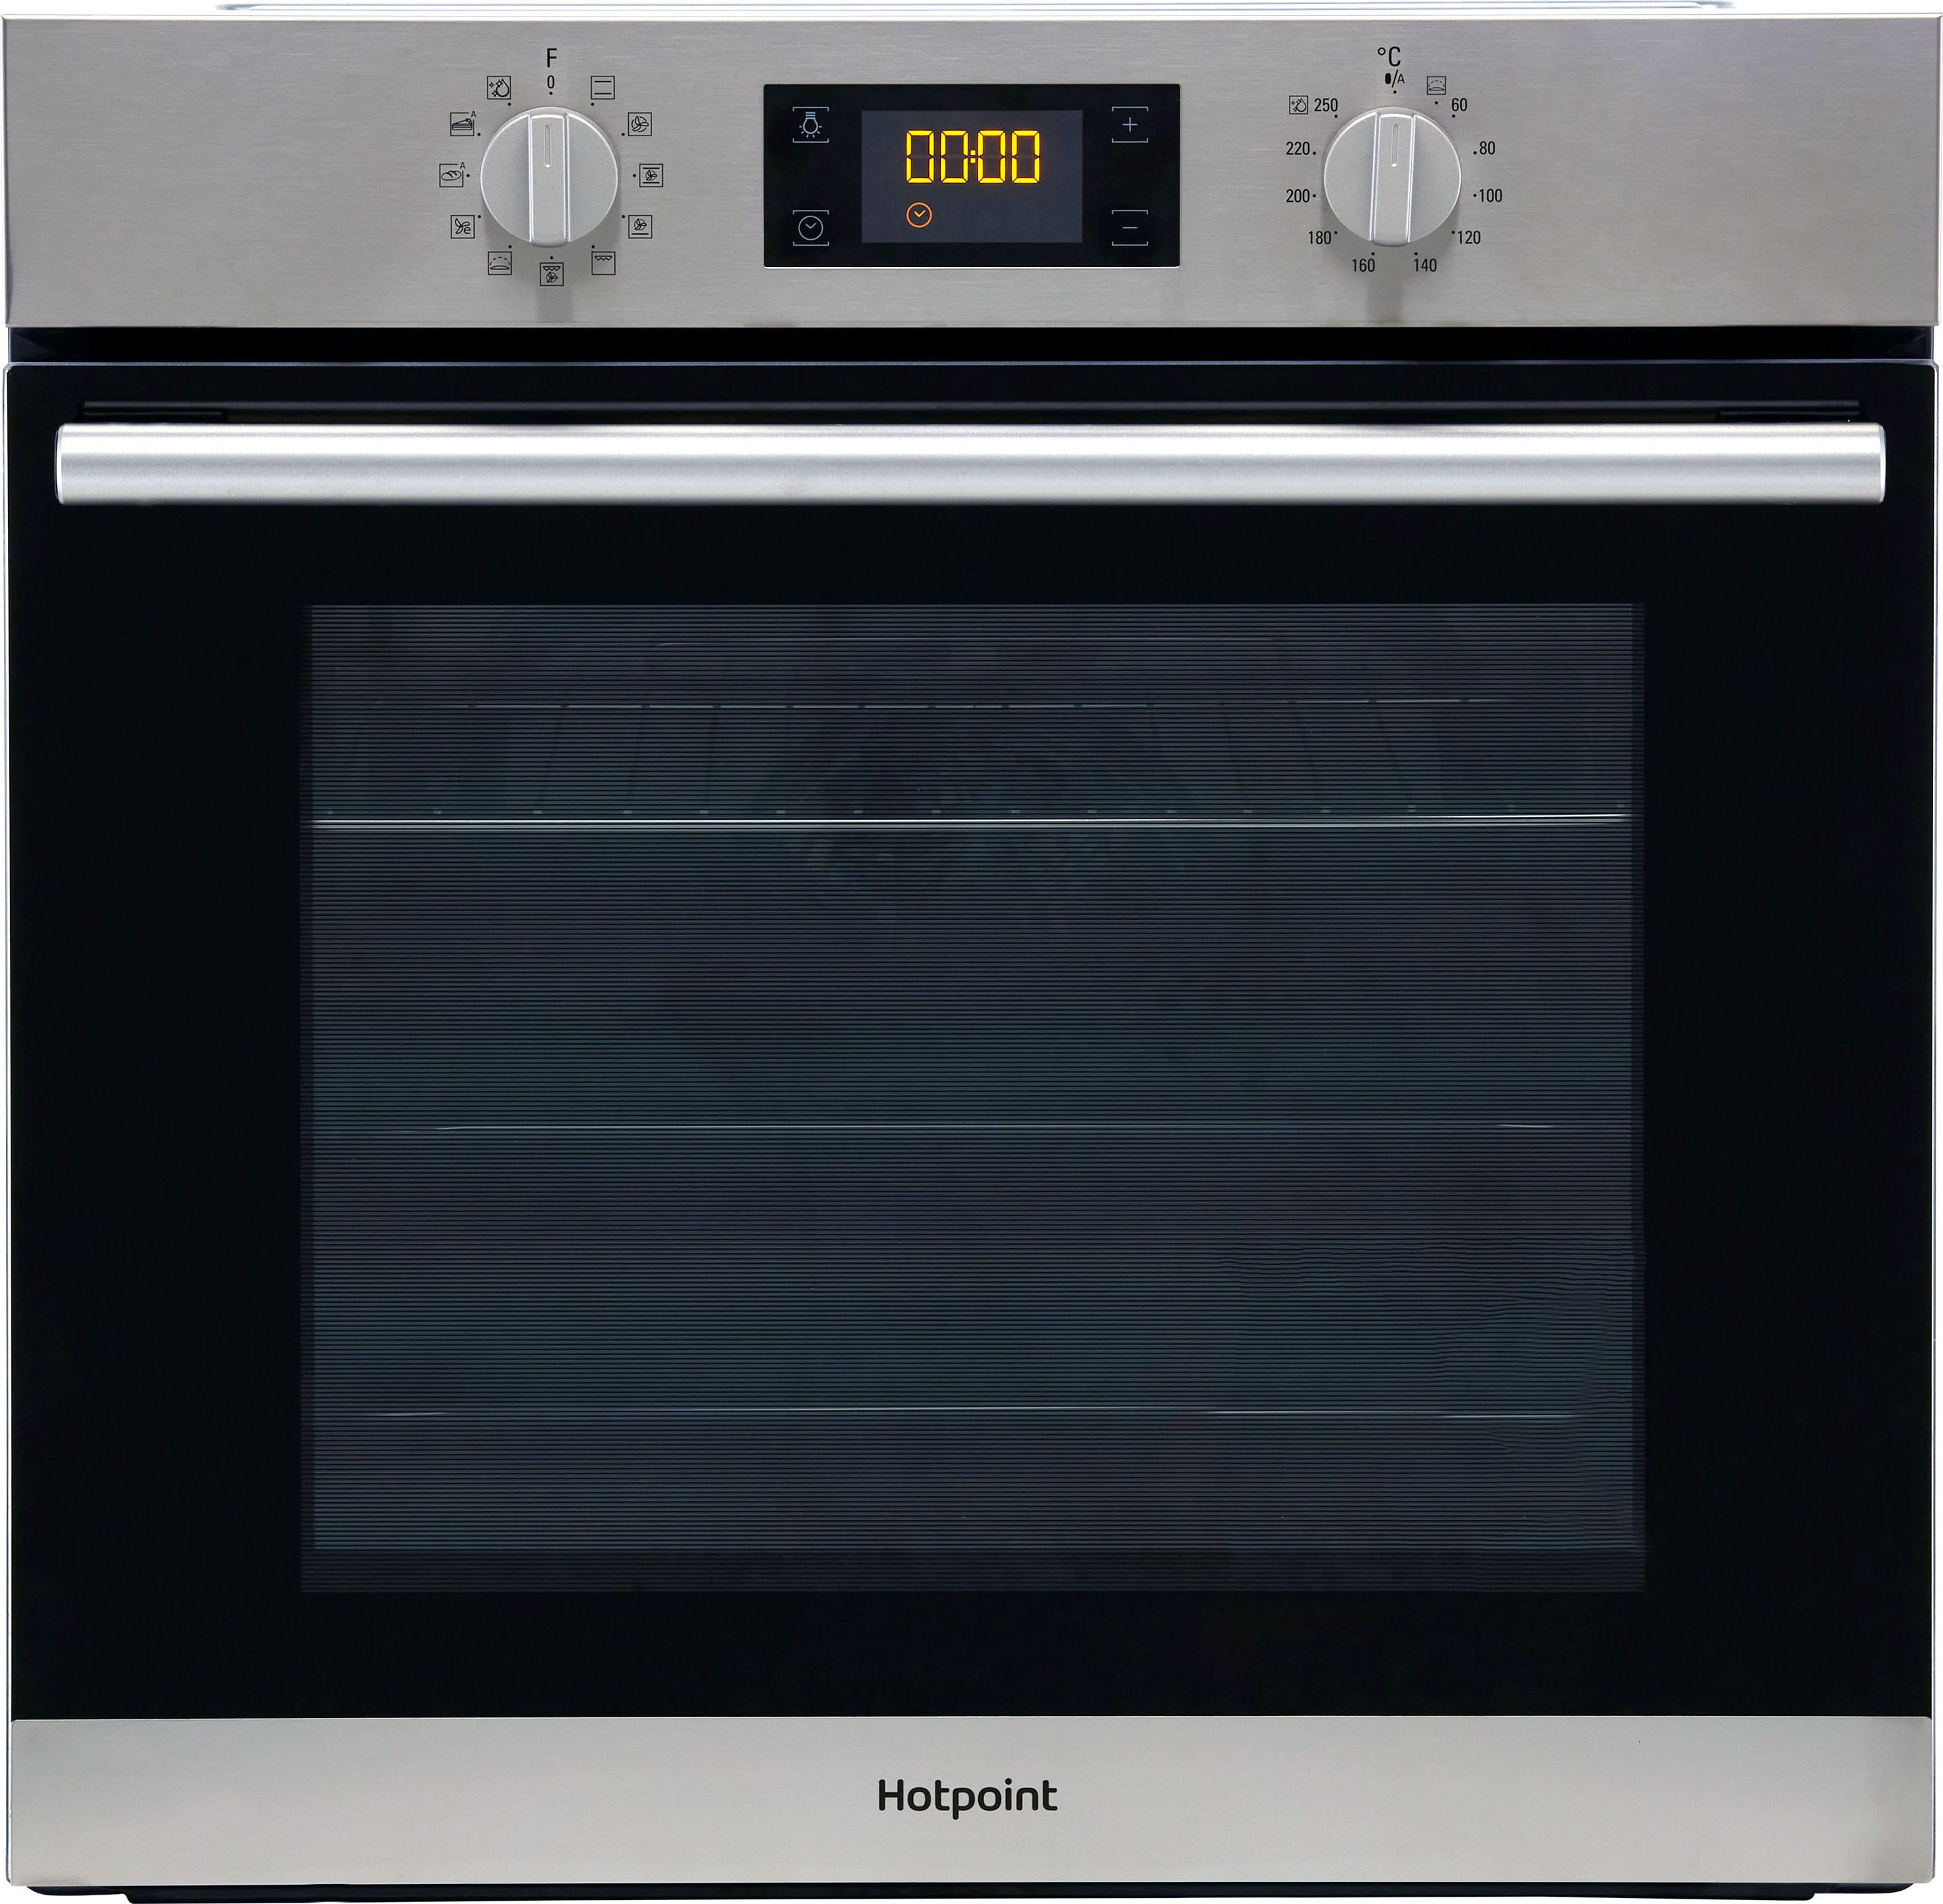 Hotpoint Class 2 SA2844HIX Built In Electric Single Oven - Stainless Steel - A+ Rated, Stainless Steel